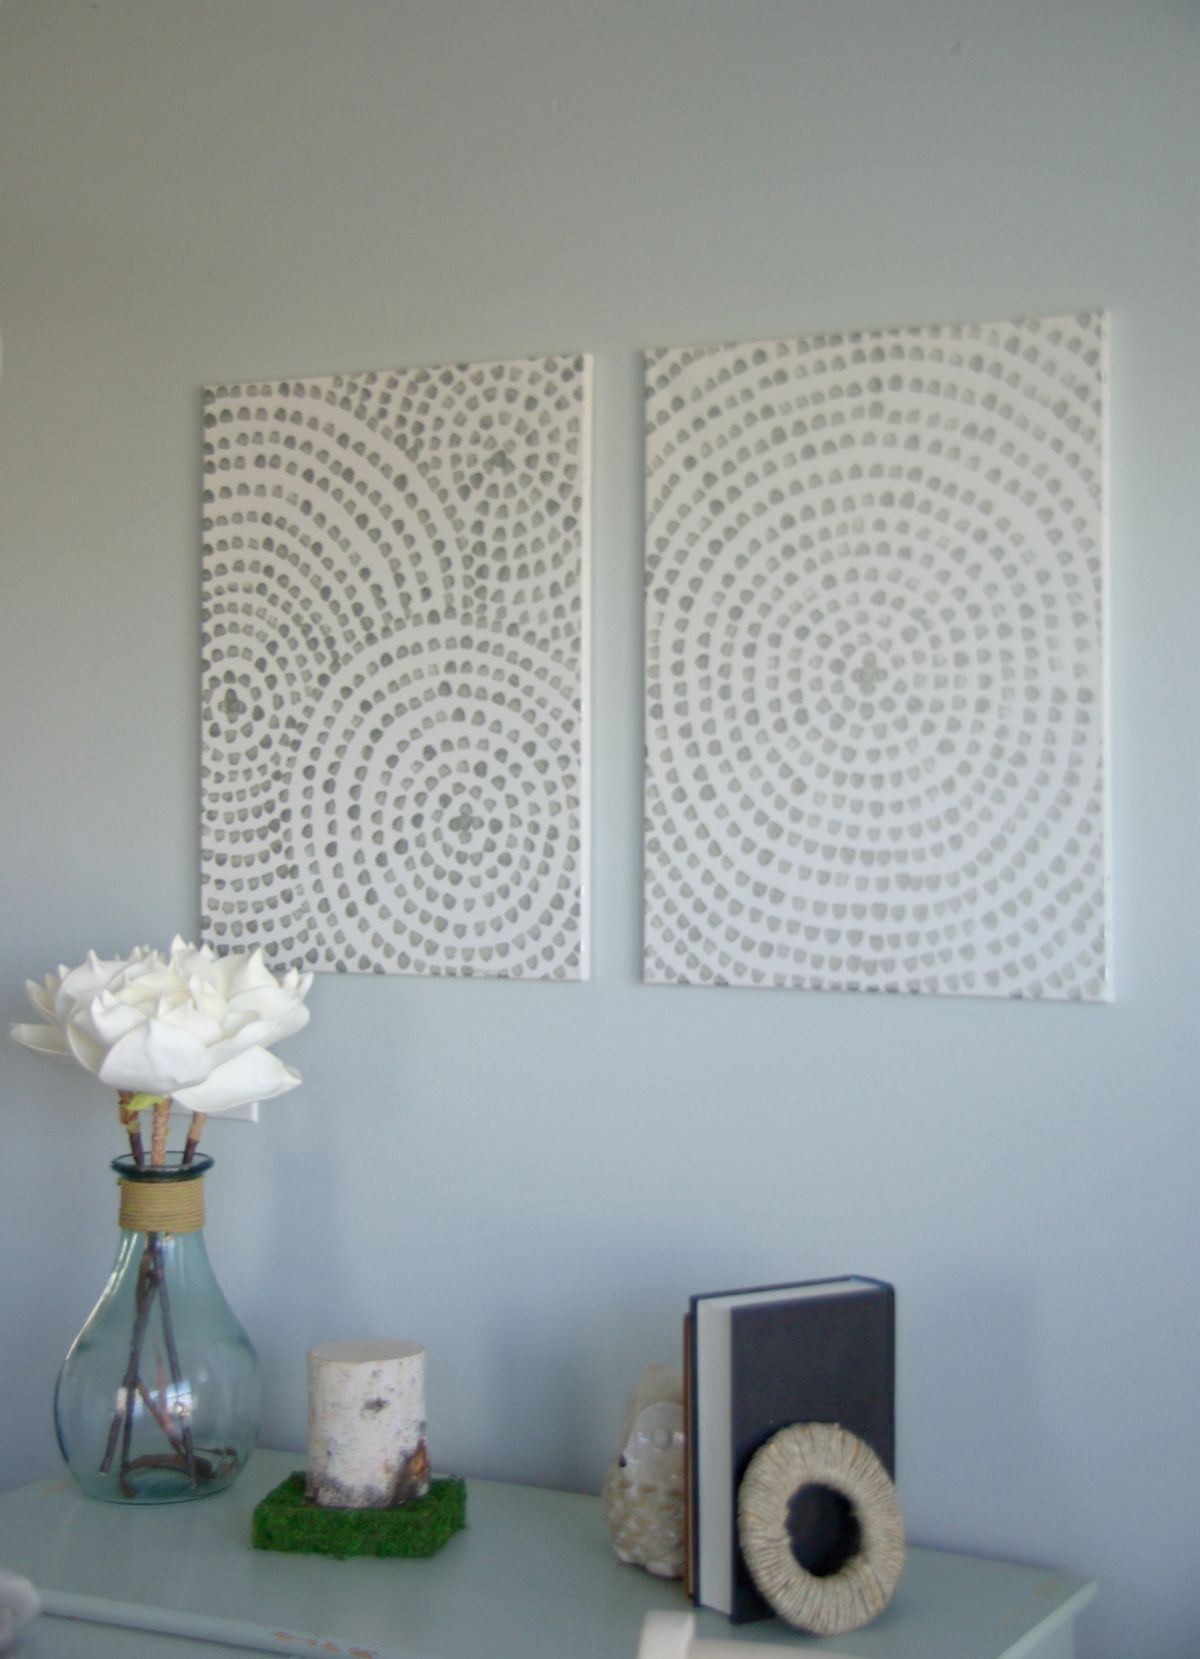 DIY Wall Decor Ideas
 DIY Canvas Wall Art A Low Cost Way To Add Art To Your Home